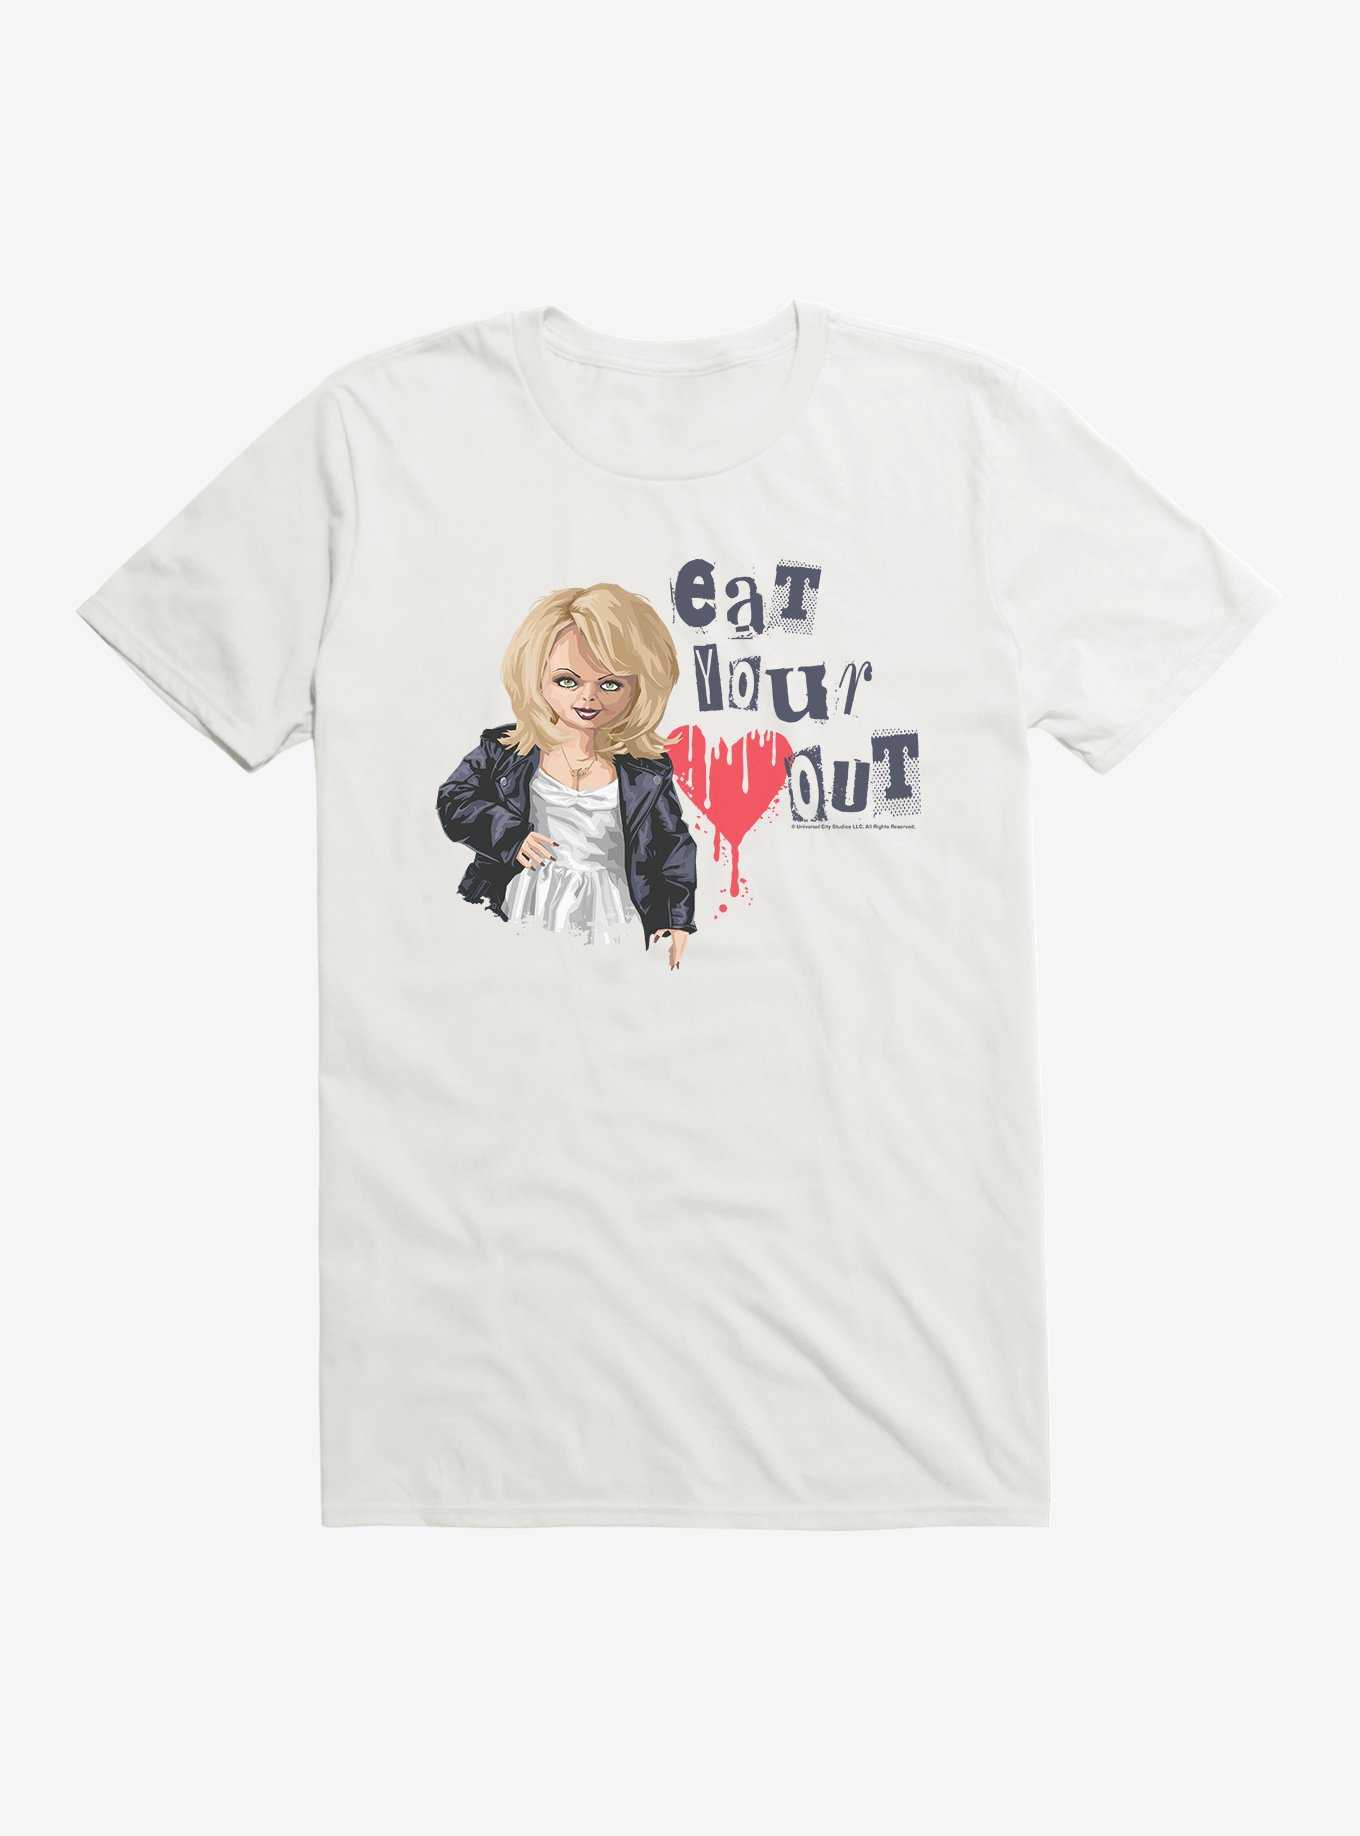 Chucky Eat Your Heart Out T-Shirt, , hi-res